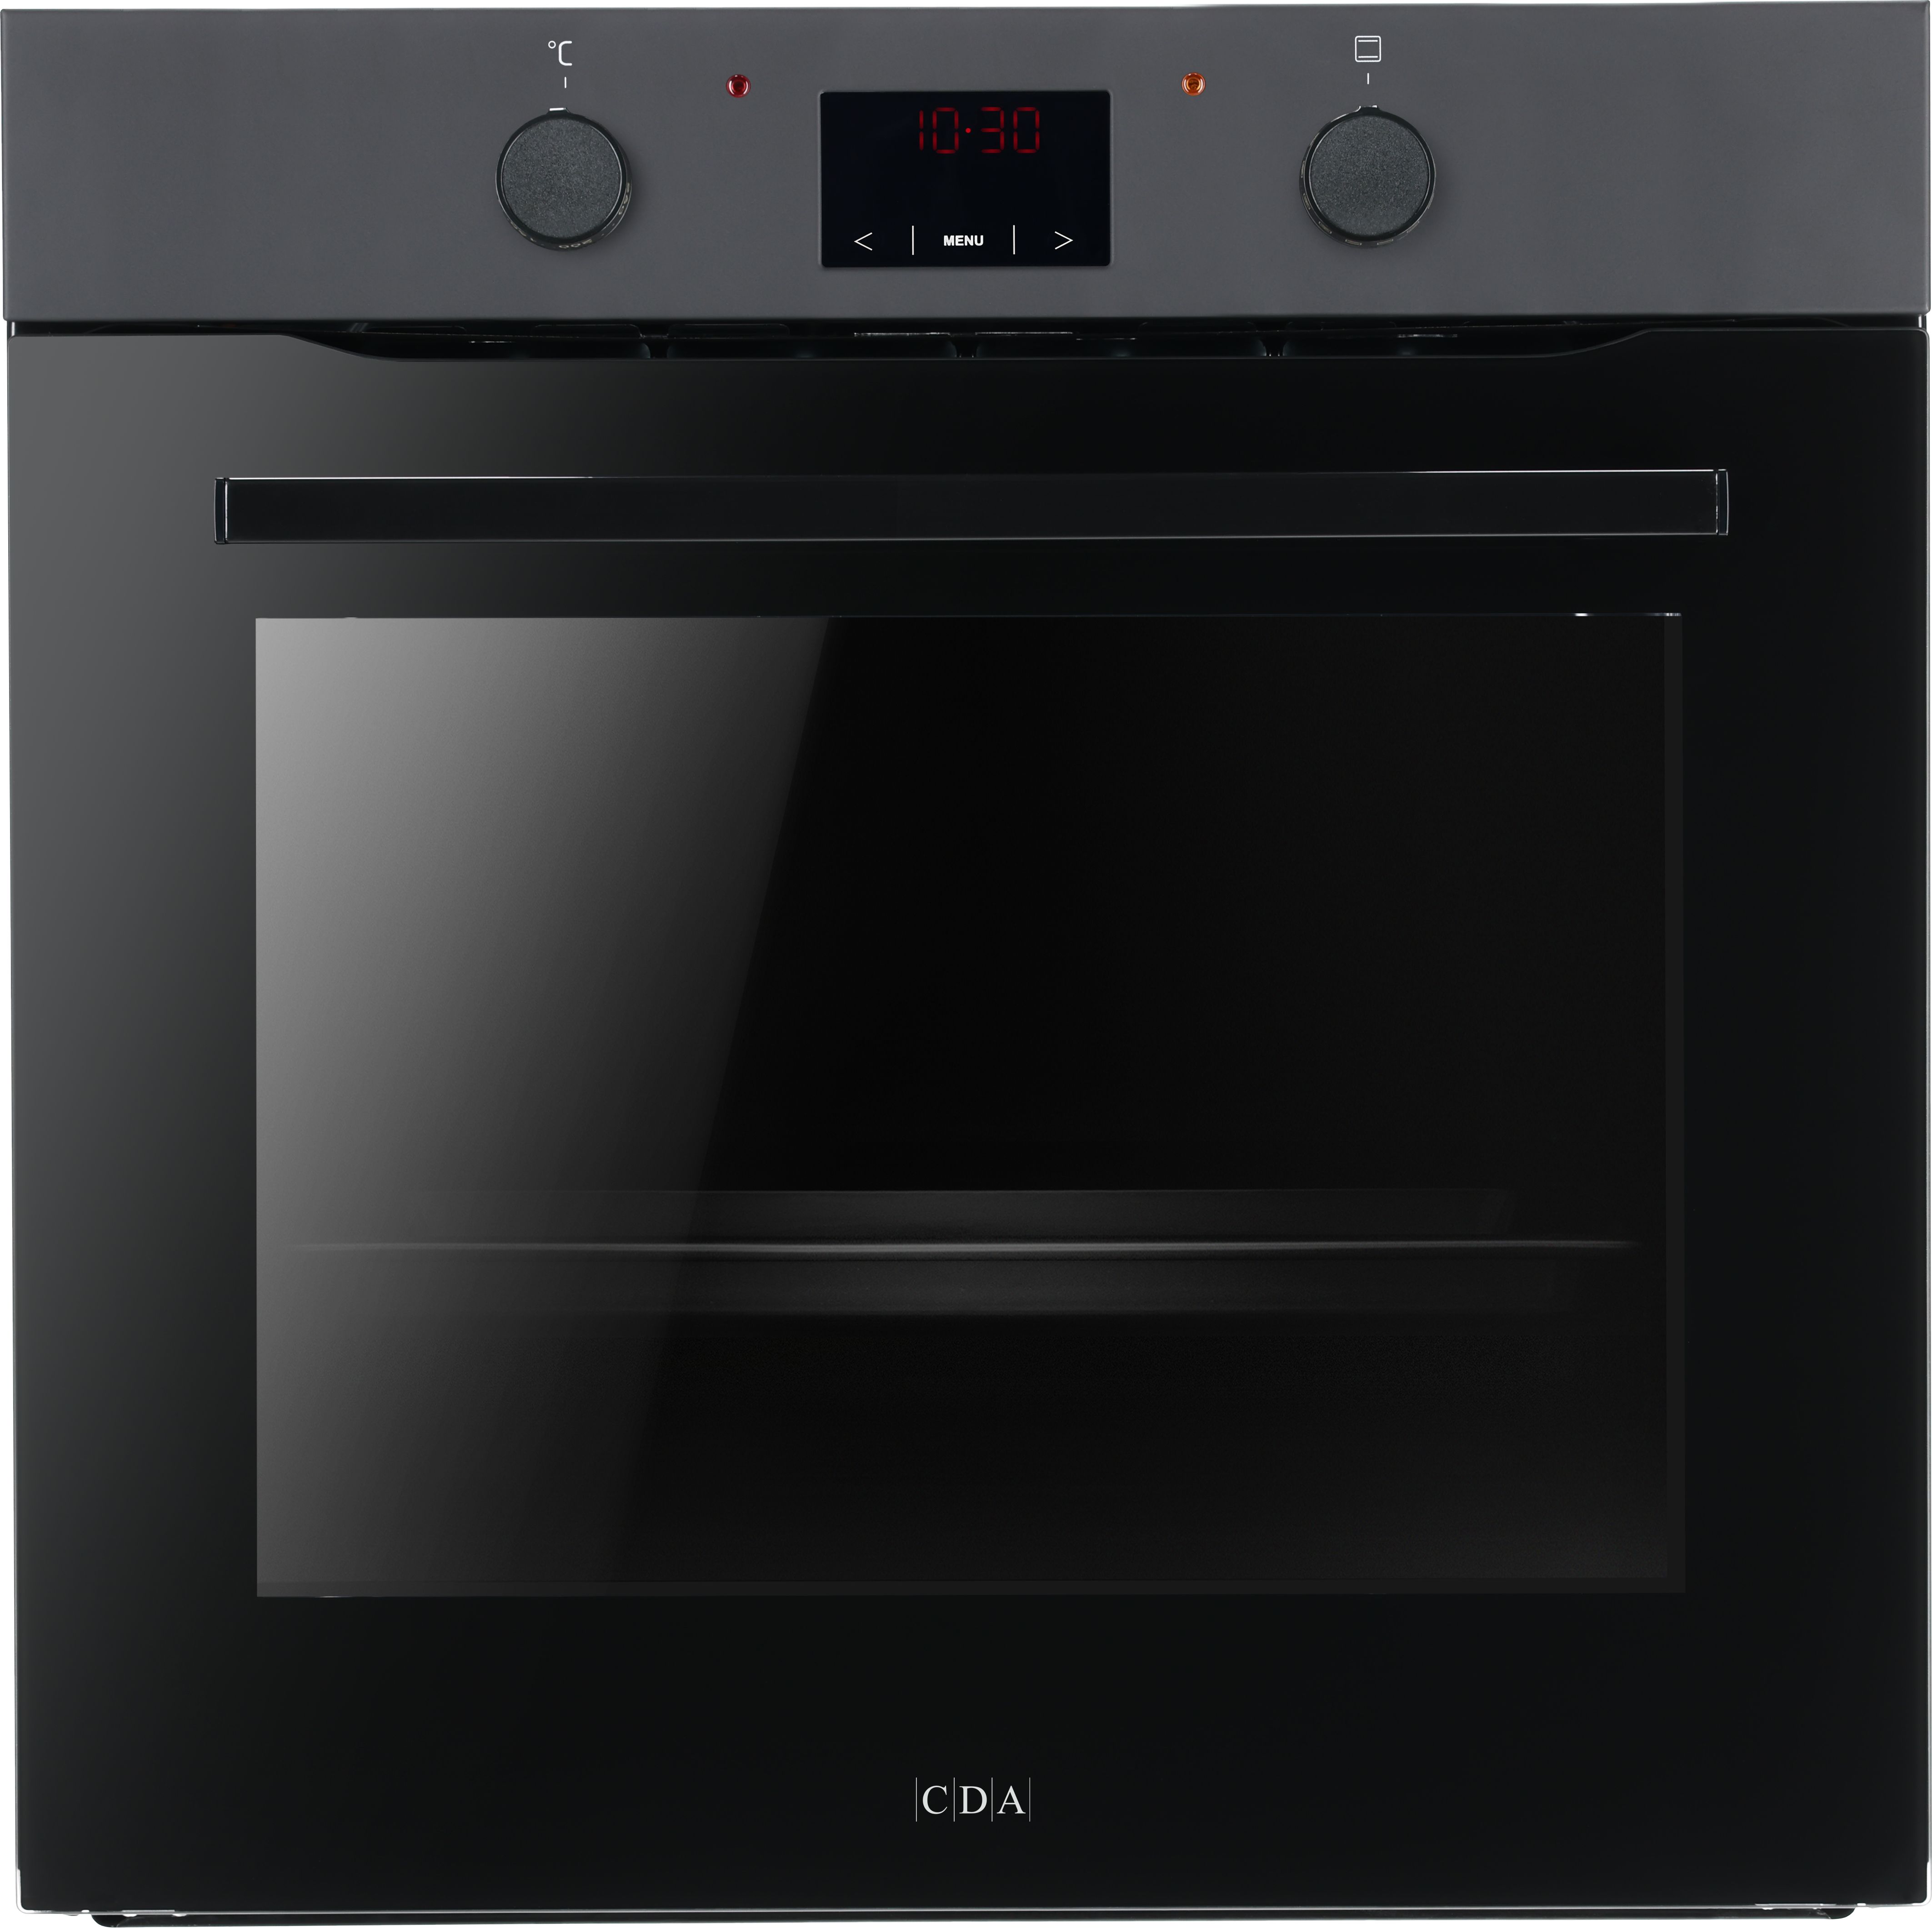 CDA SC035BL Built In Electric Single Oven - Black - A Rated, Black